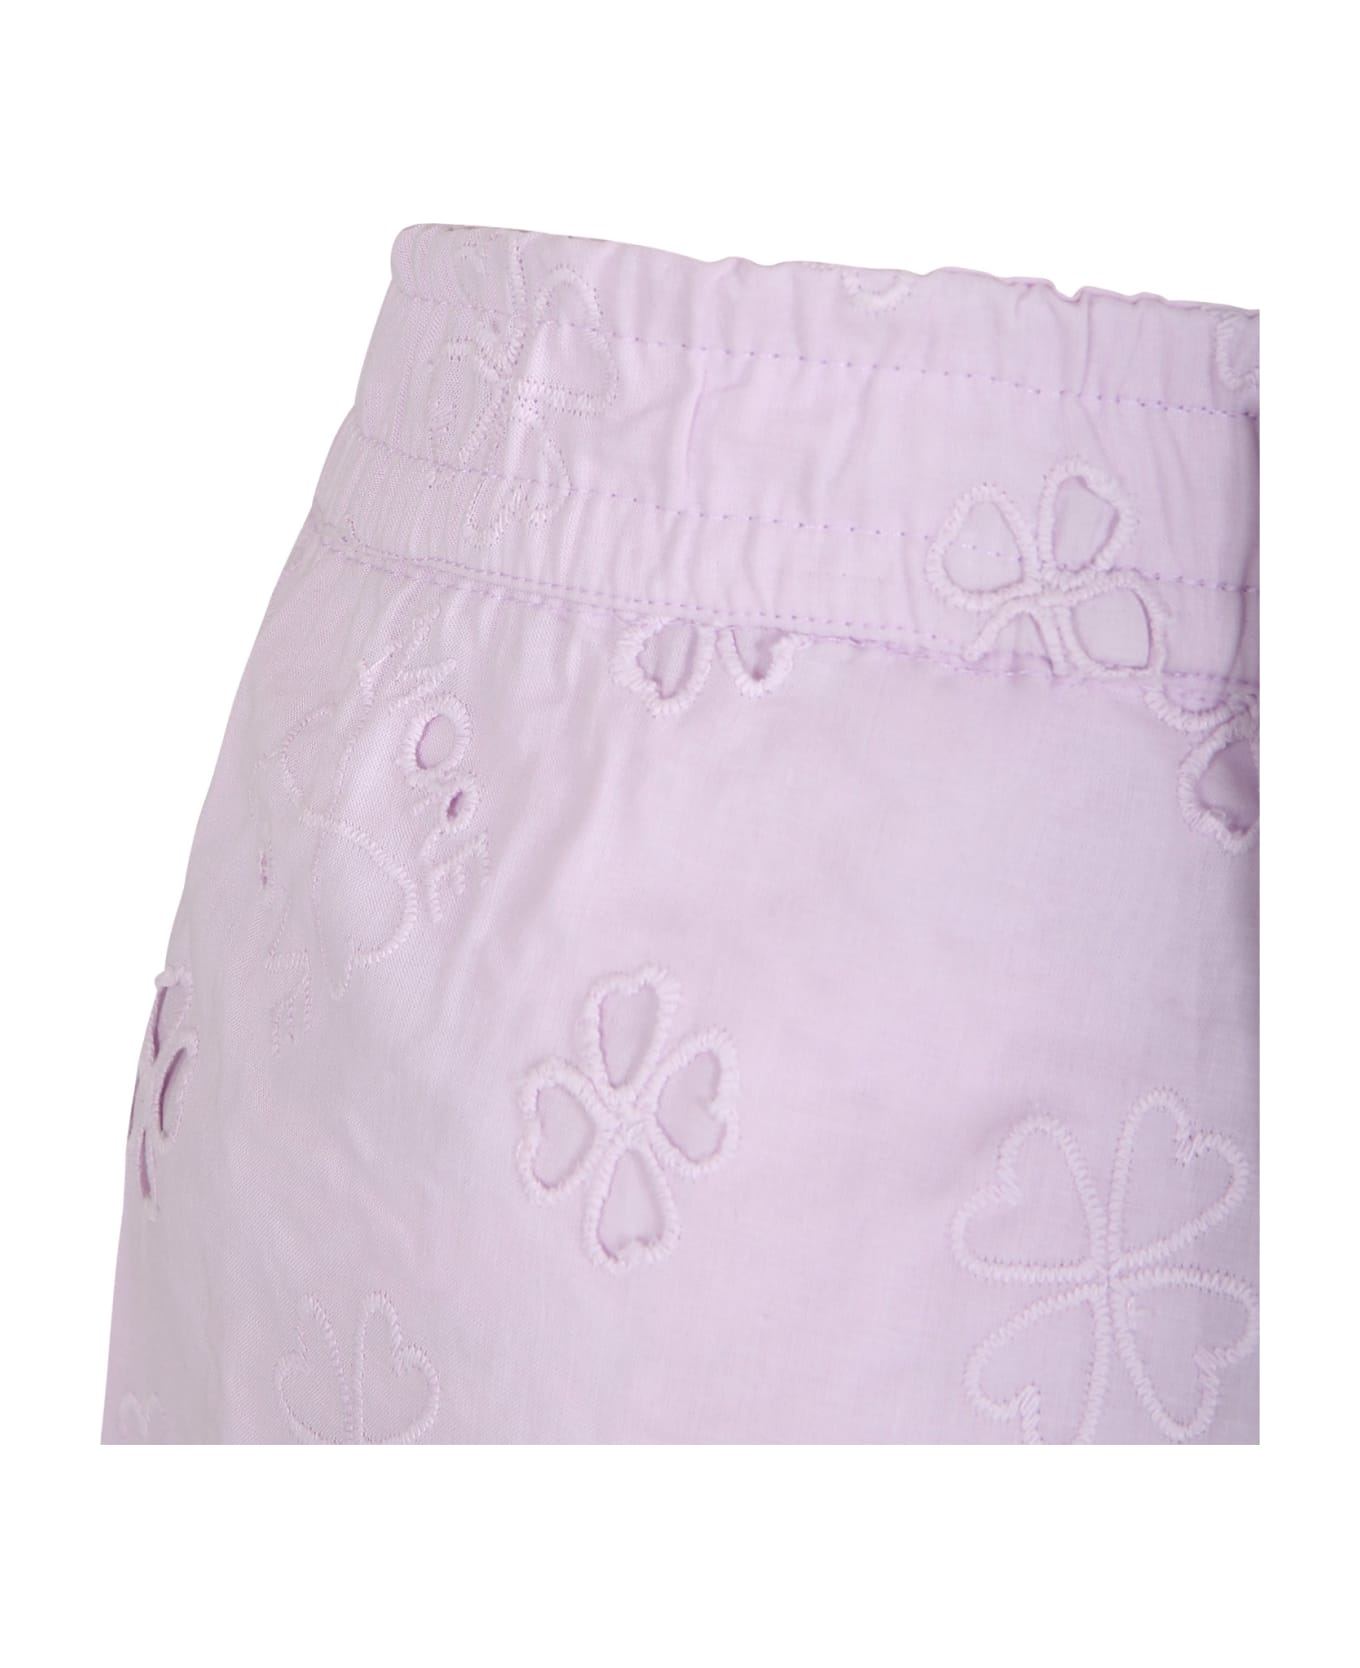 Molo Pink Casual Trousers For Girl With Macramé Lace - Pink